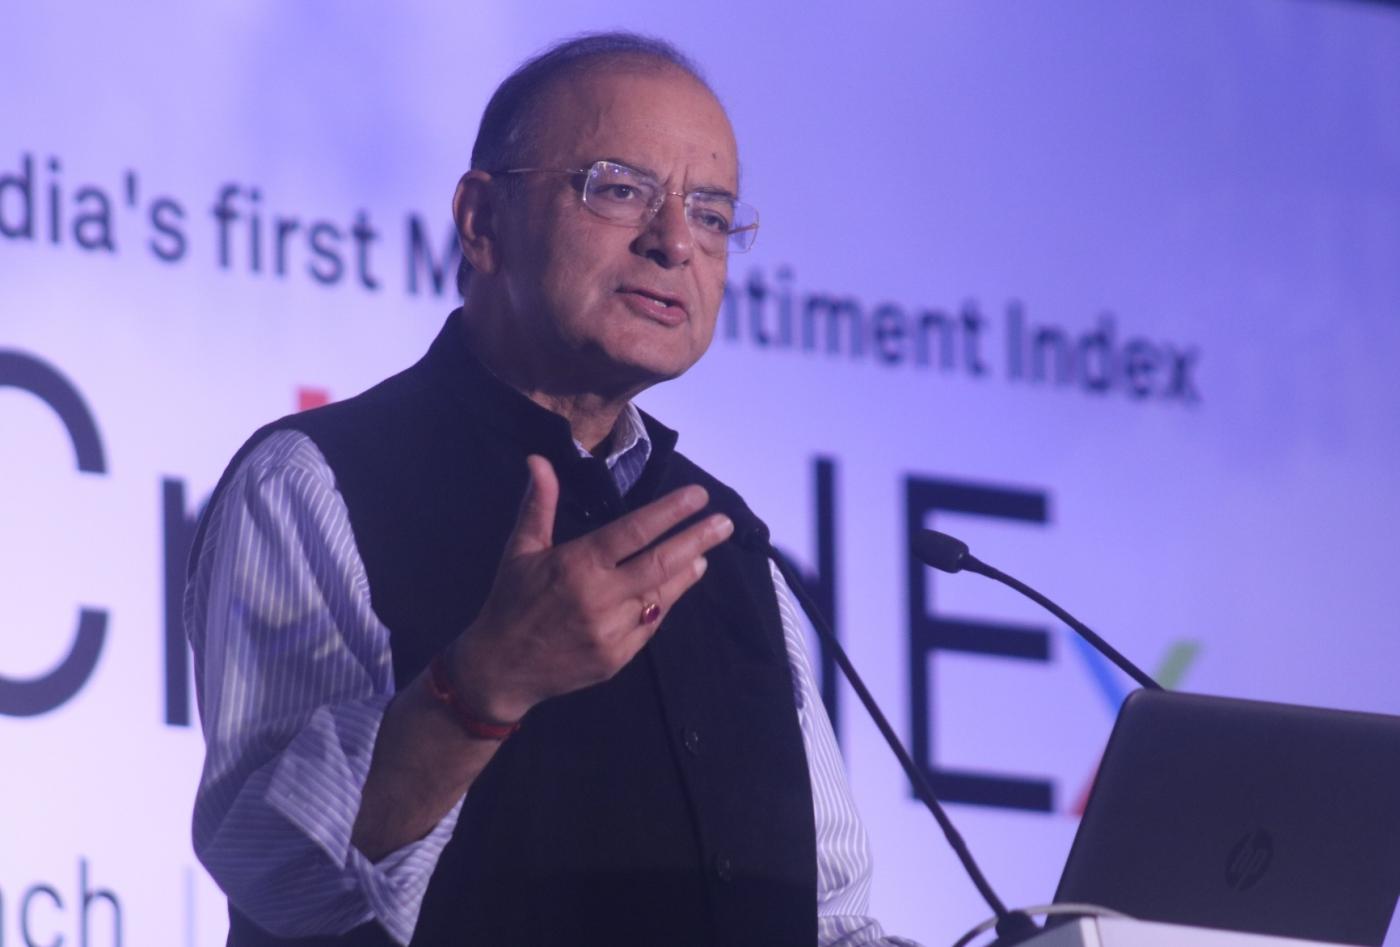 New Delhi: Union Finance Minister Arun Jaitley addresses during the launch of India's first sentiment index - CriSidEx, in New Delhi on Feb 3, 2018. (Photo: IANS) by . 